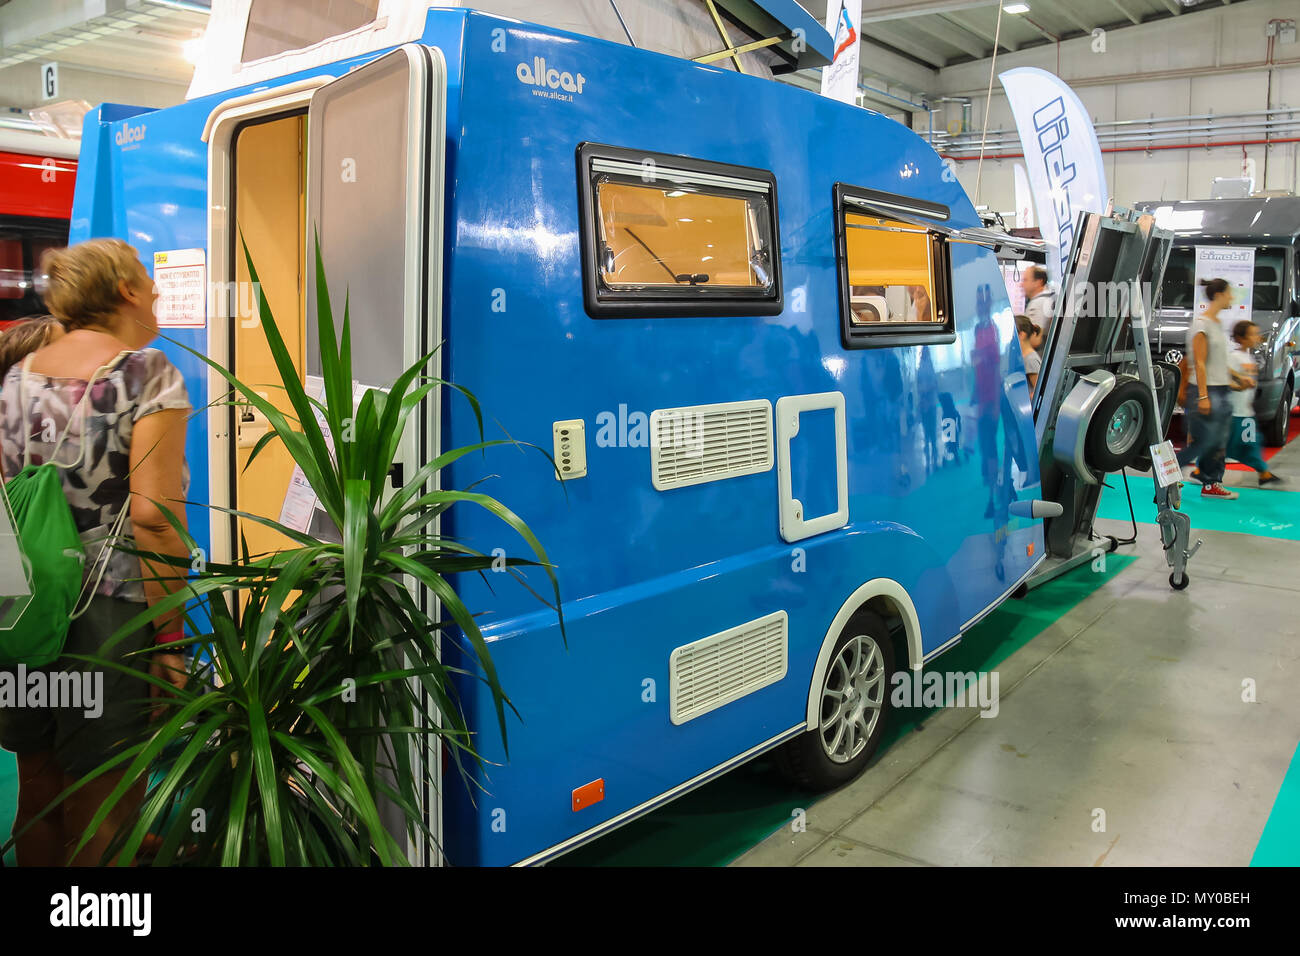 Parma, Italy - September 17, 2016: People looking at auto in annual exhibition of camper vans (Salone del Camper) Stock Photo